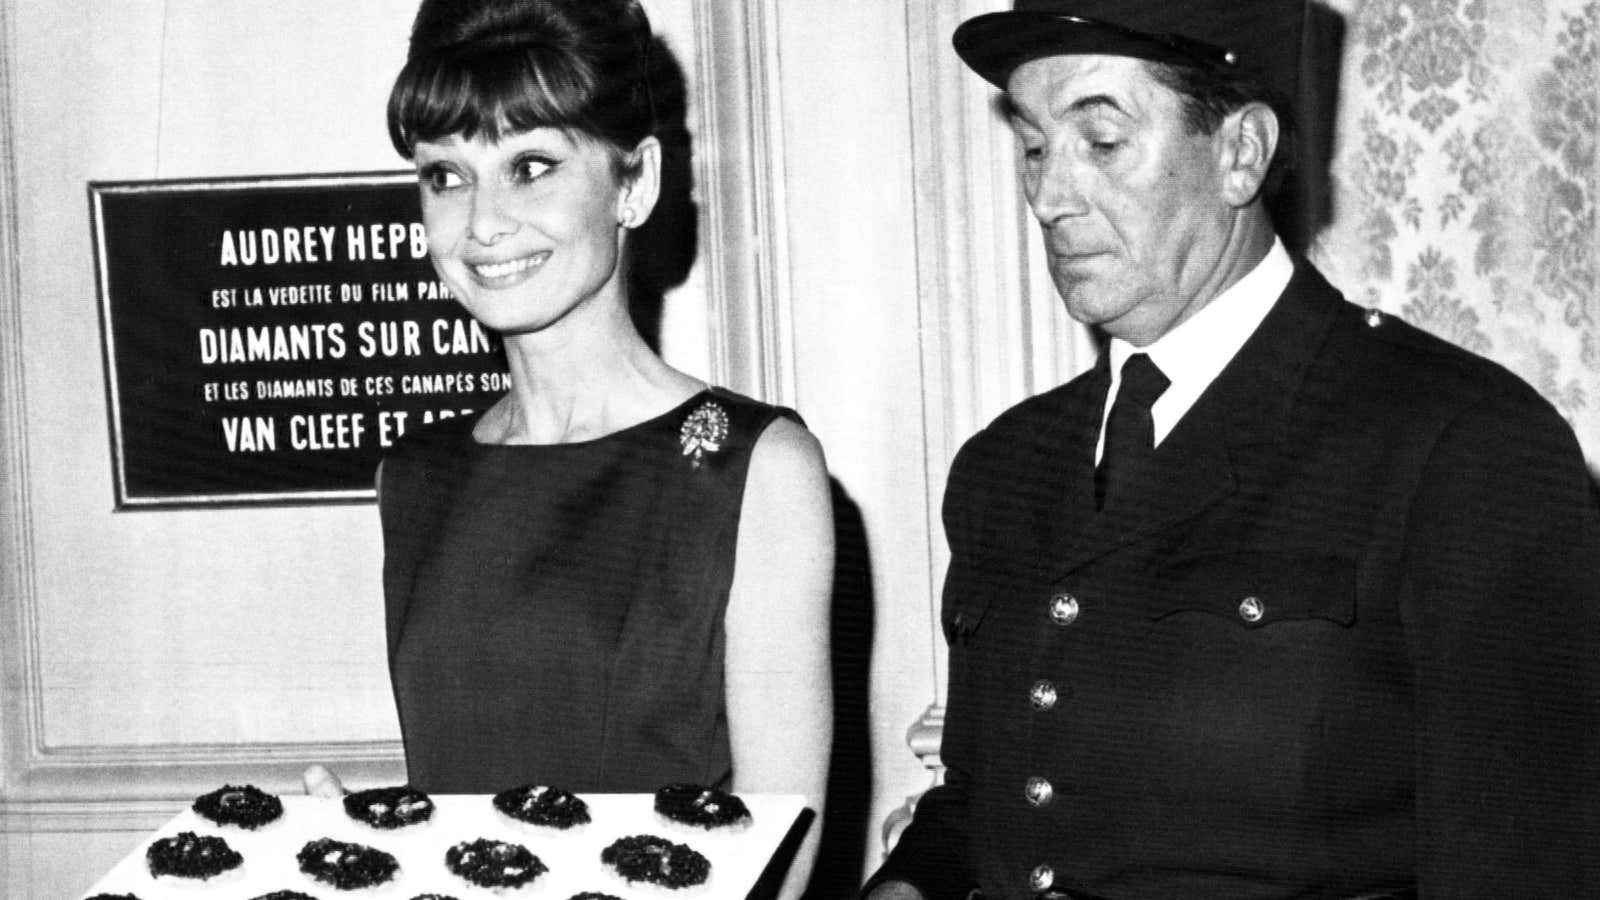 Audrey Hepburn presents $600,000 worth of diamonds on caviar sandwiches during a cocktail party at the Plaza Athenee Hotel in Paris, Jan. 12, 1962.